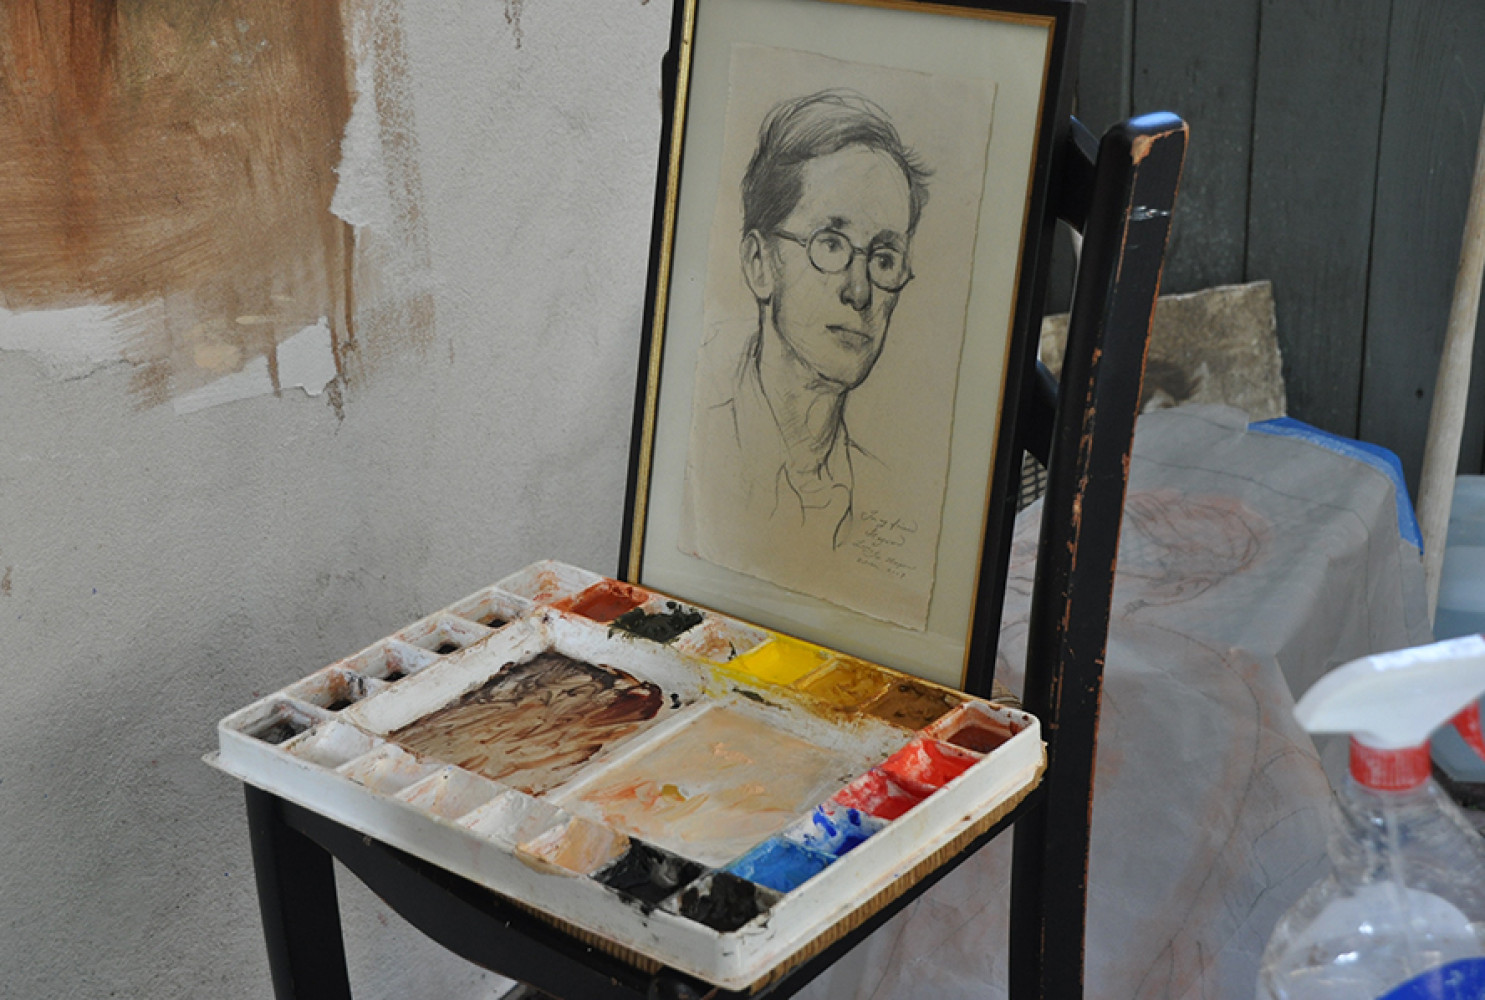 Paint palette and drawing for character reference in the painting. 